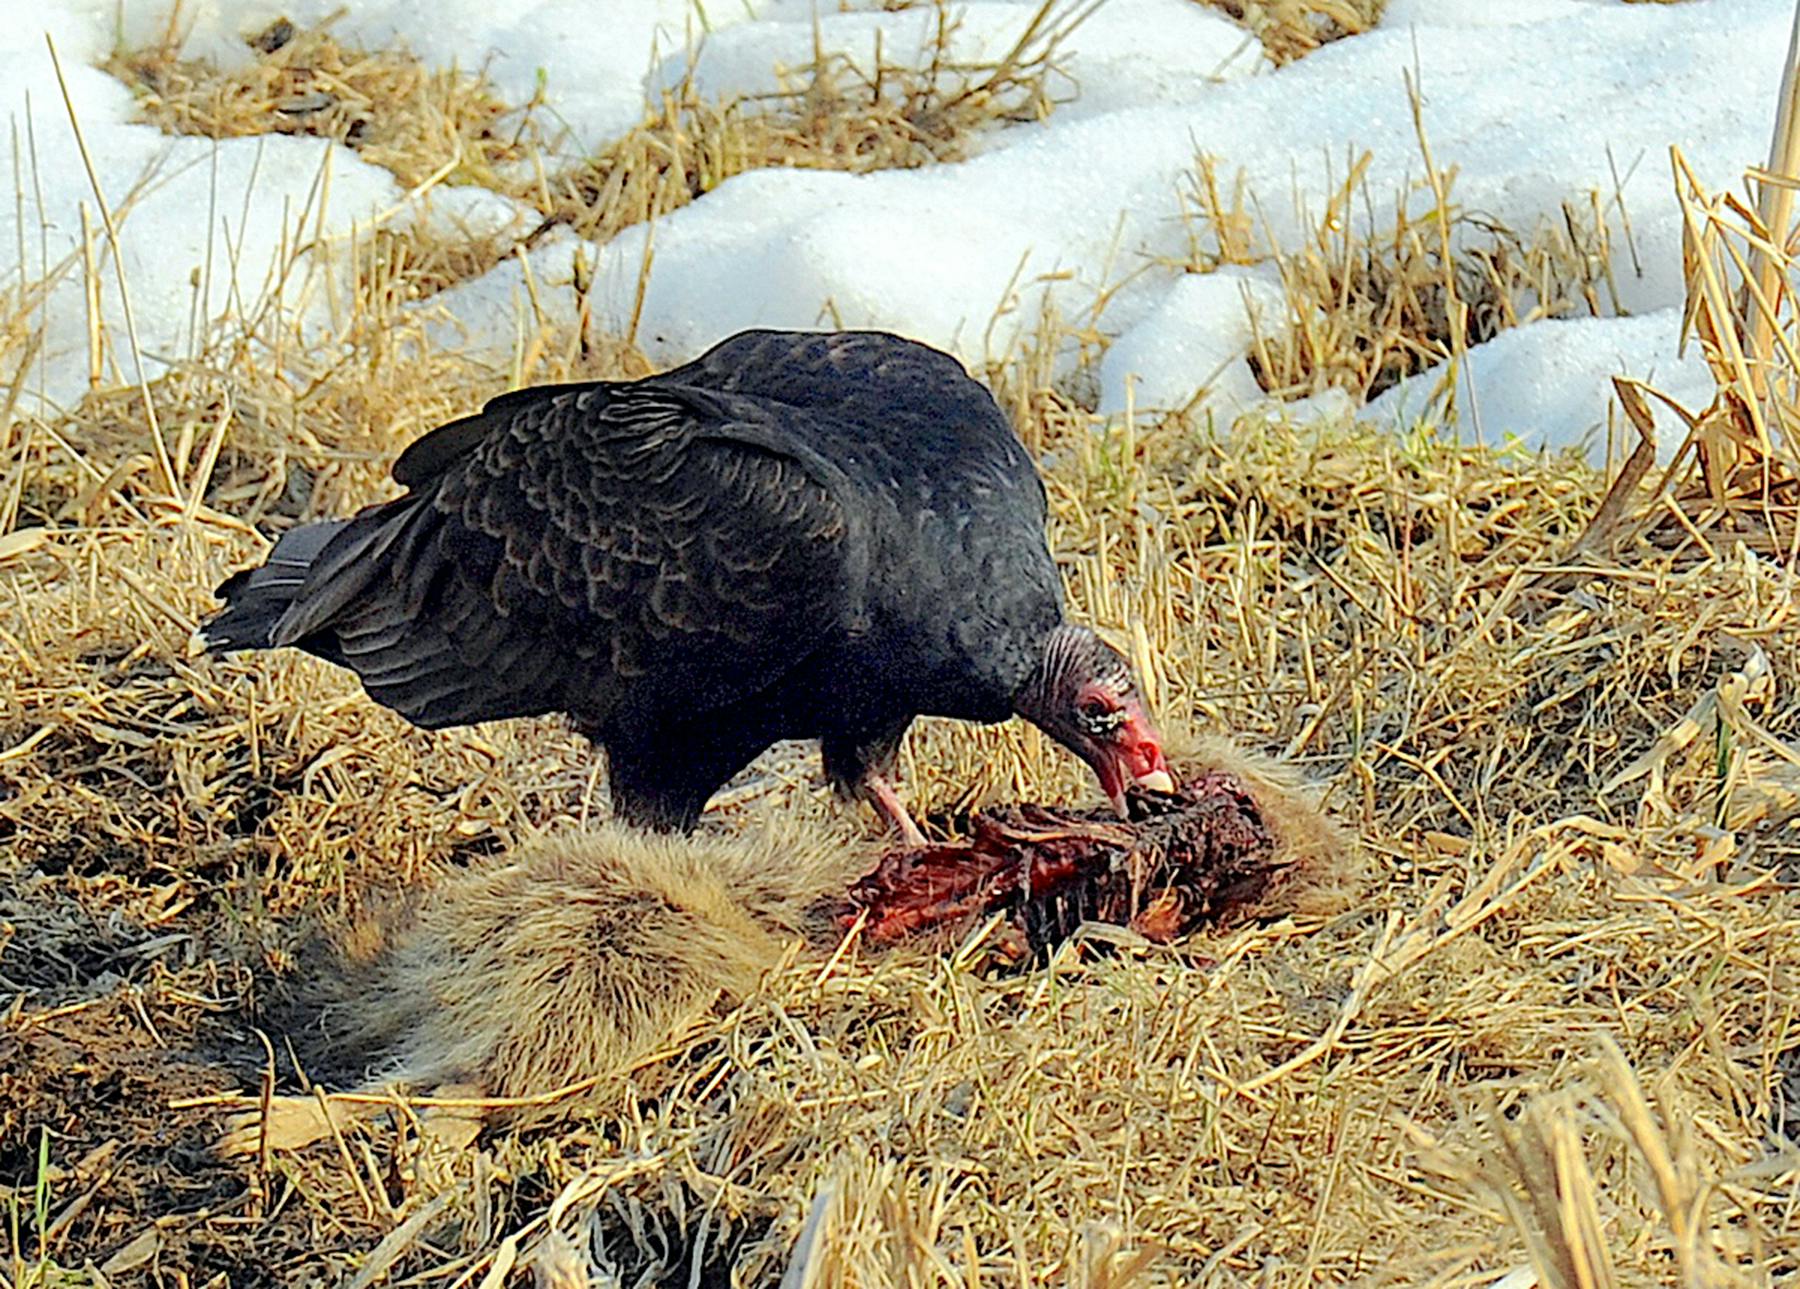 Turkey vulture's stomachs let them safely eat decayed things the rest of us shouldn't.